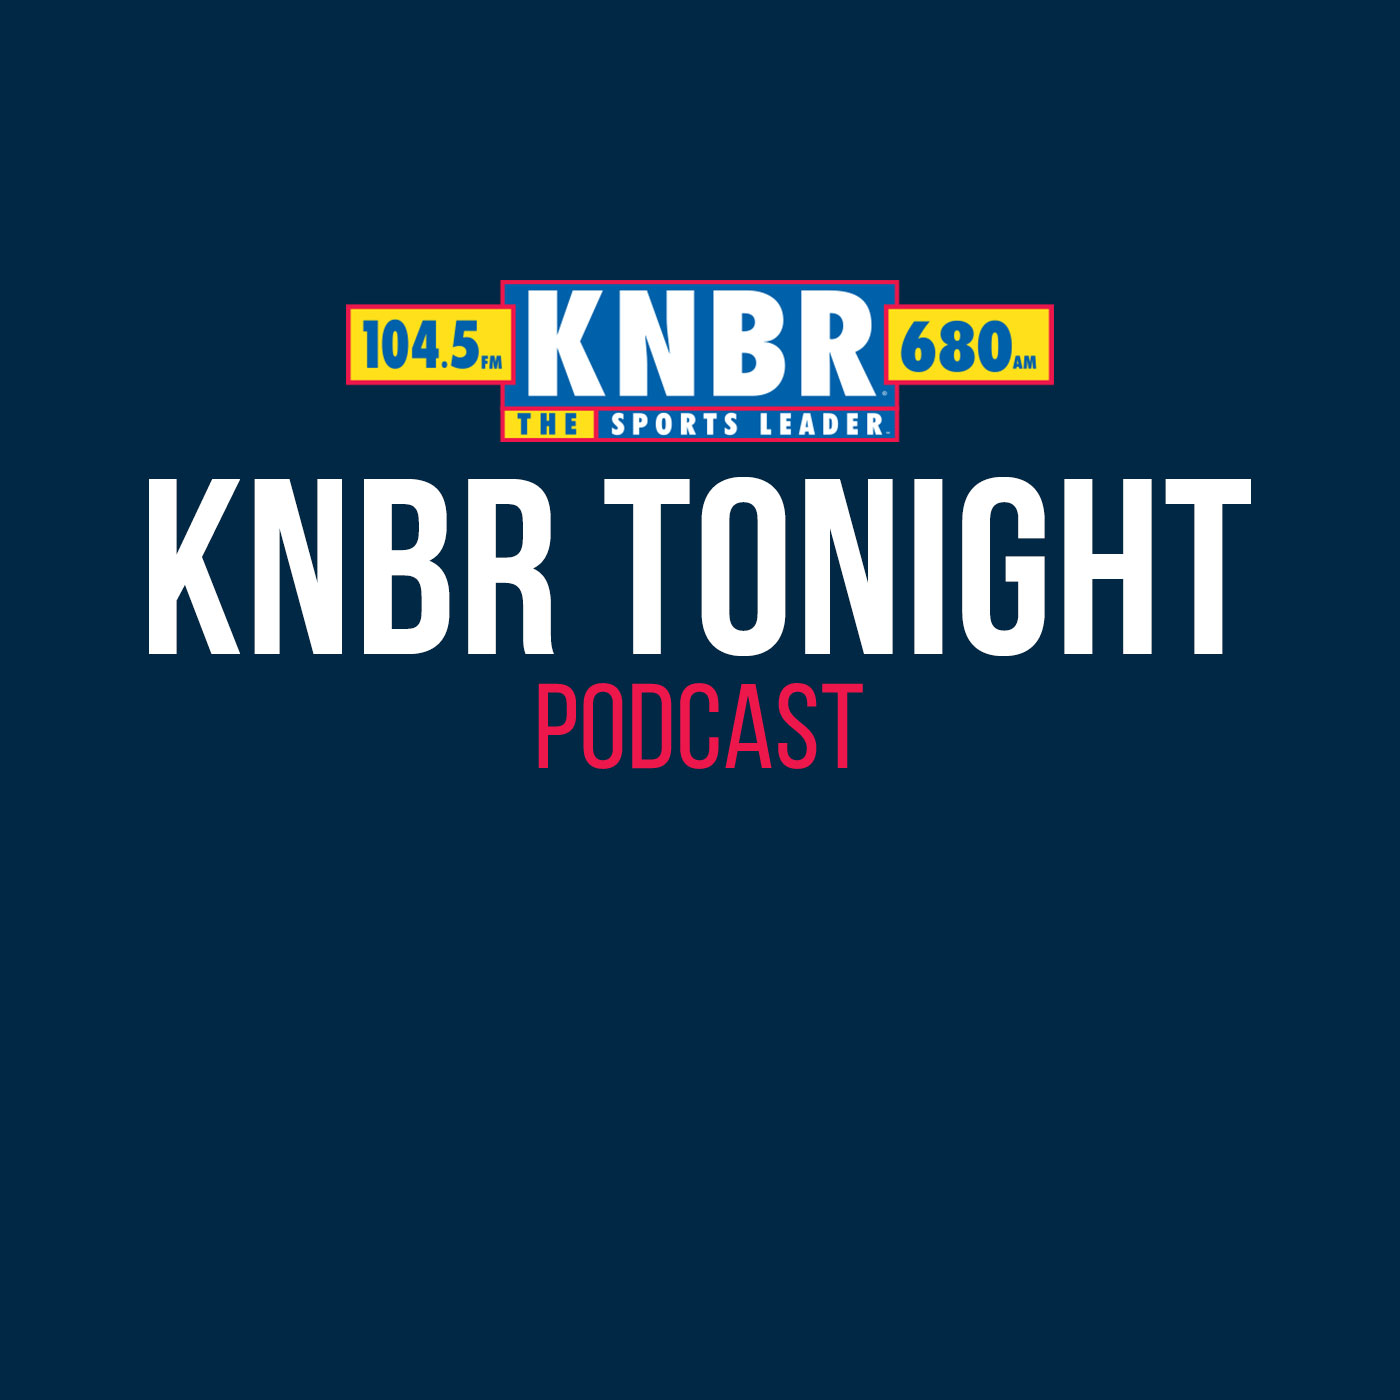 10-4 Robert Murray joins KNBR Tonight to break down the NL and AL wild card matchups and his prediction for the world series